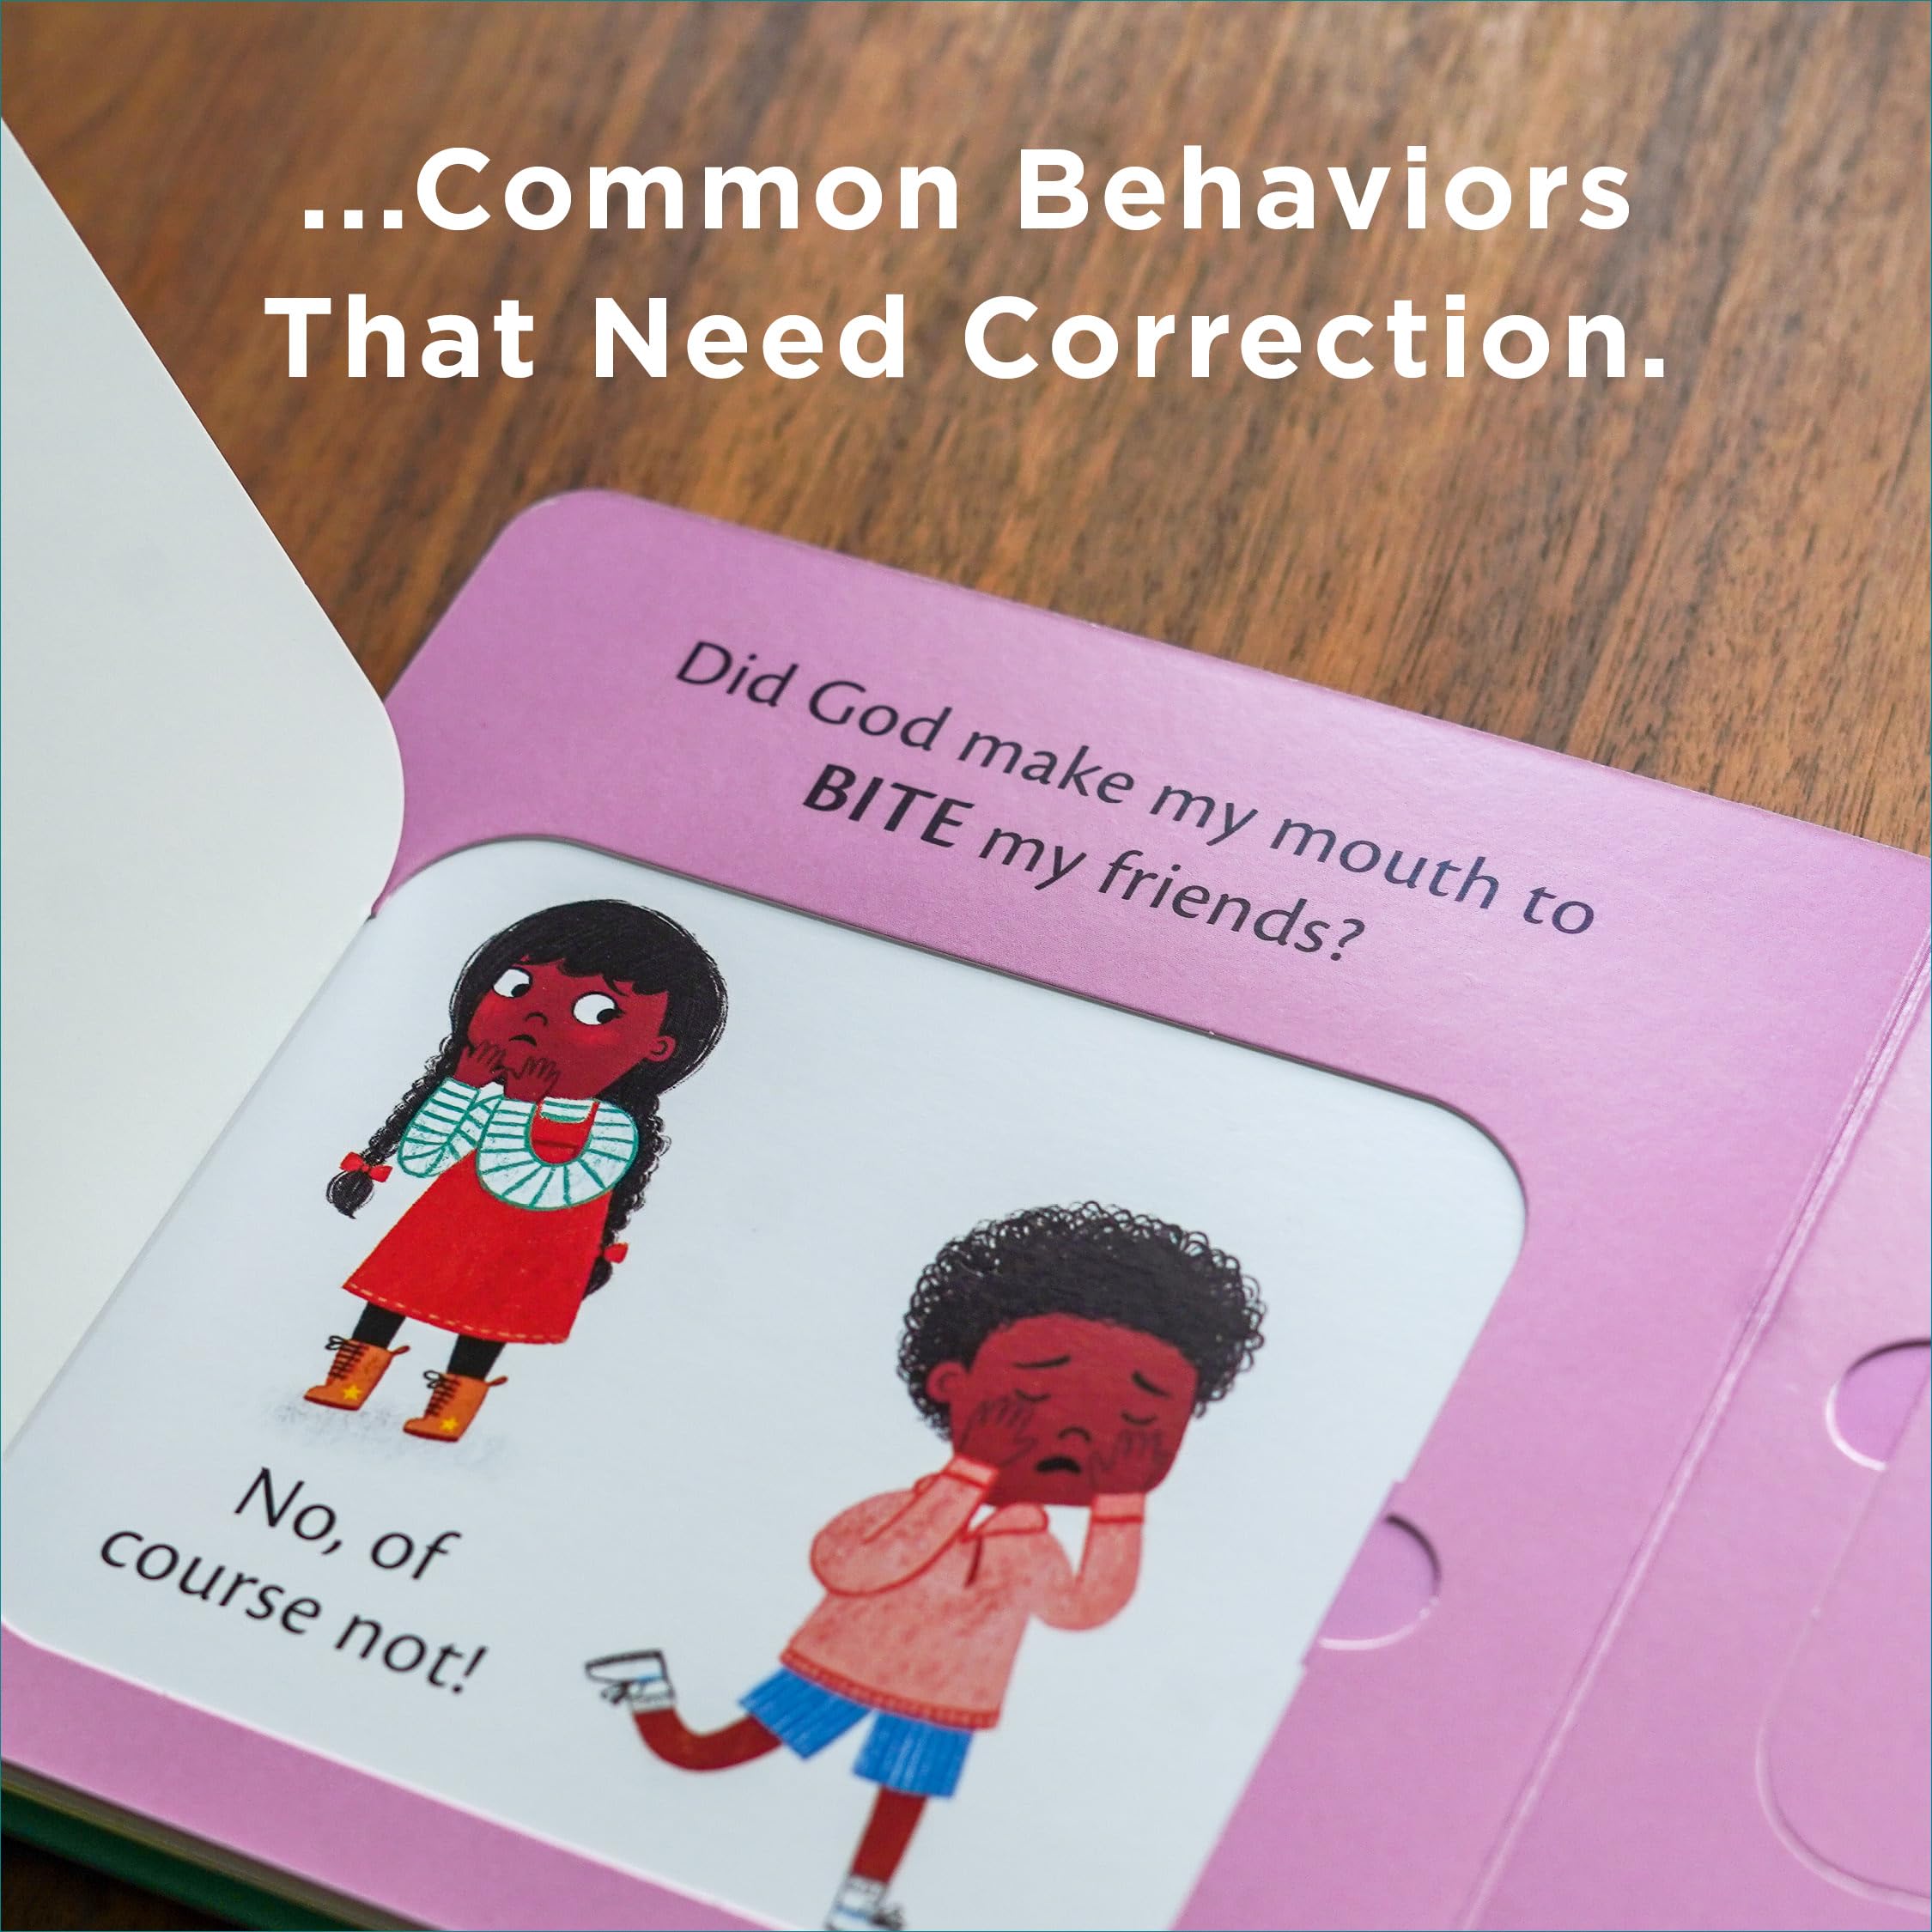 What Are Hands For? Board Book: Training Young Hearts (Christian behavior book for toddlers encouraging obedience motivated by God’s grace. Lift-the flap.)